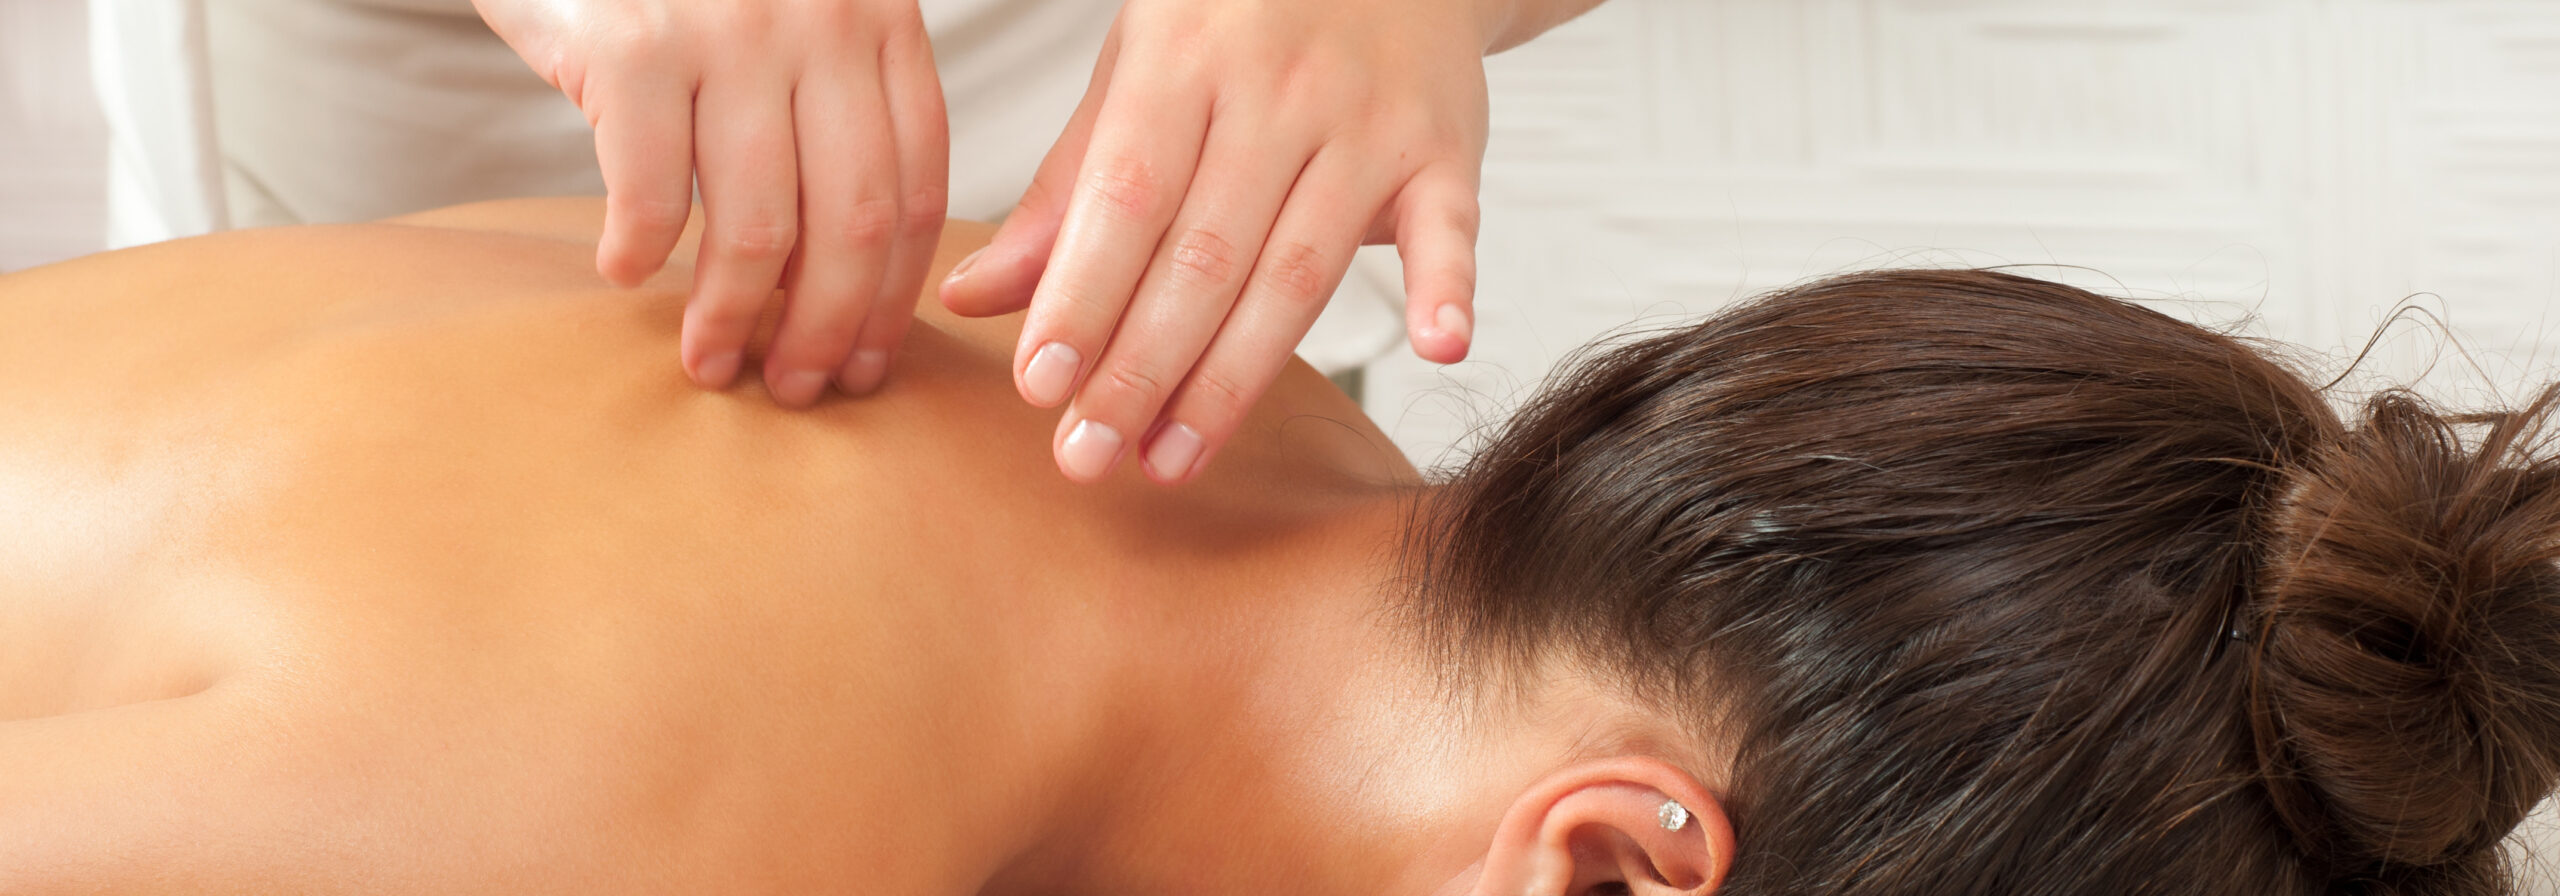 Woman getting massage in health spa